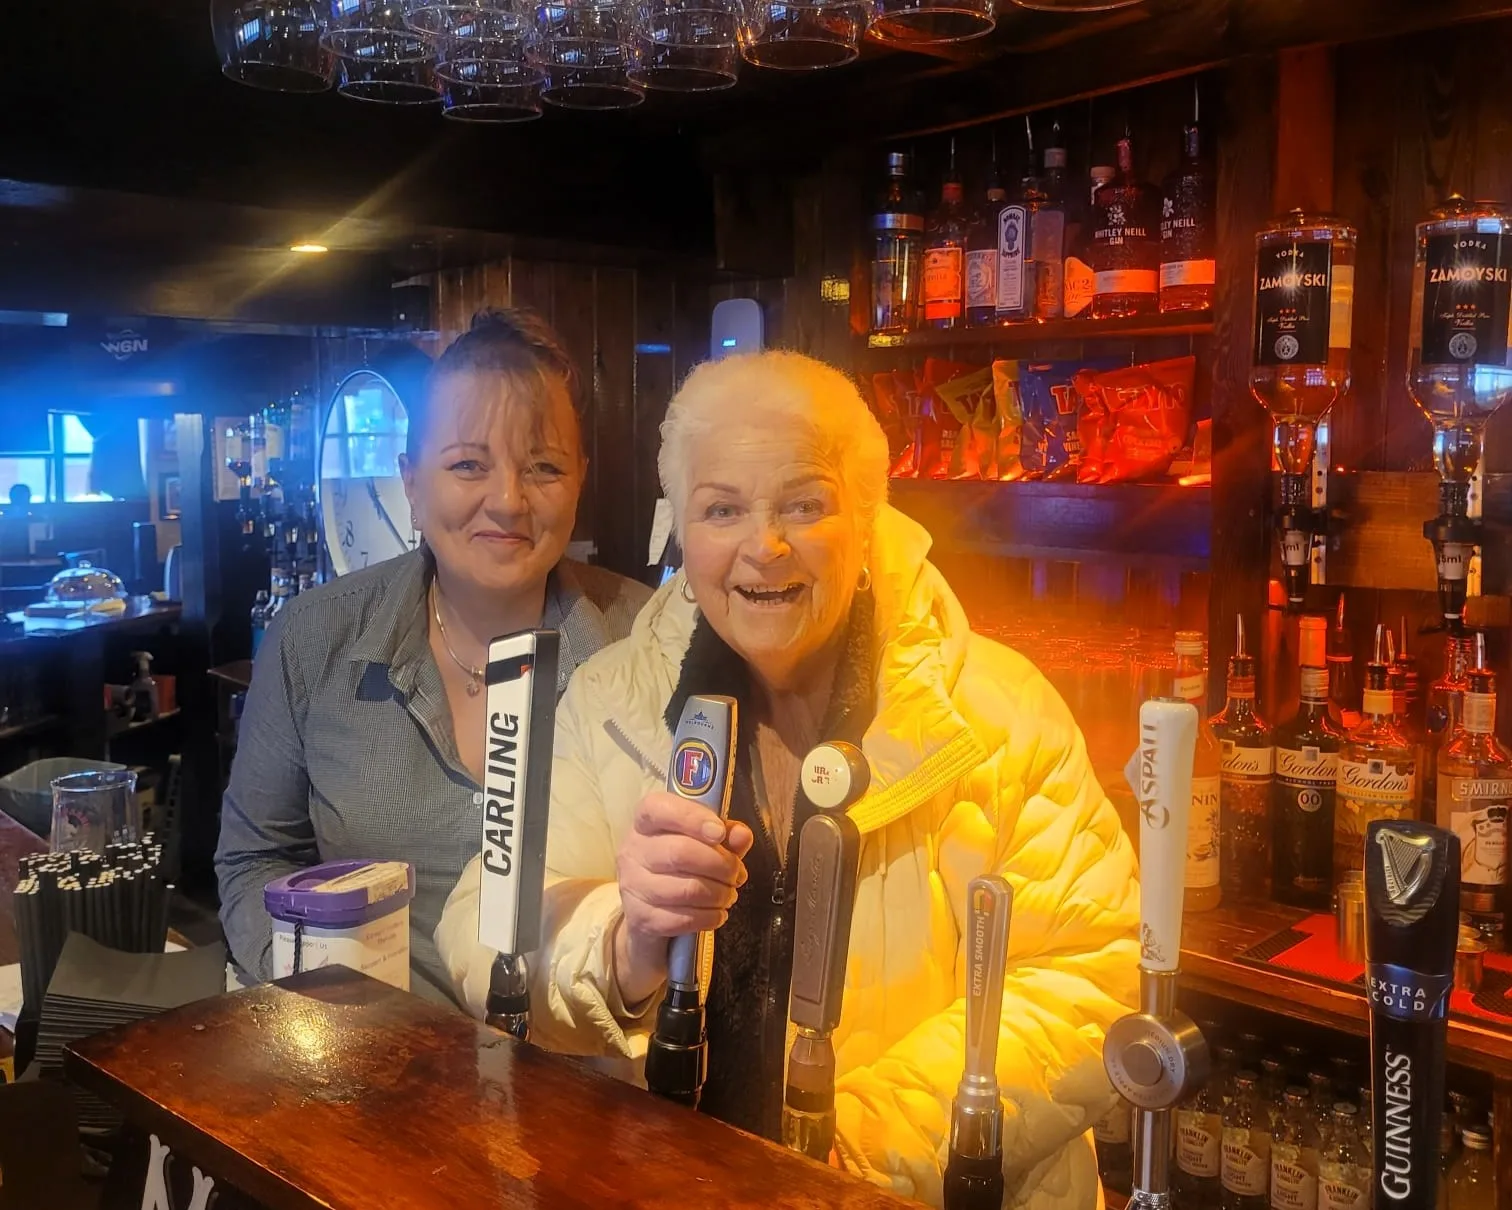 EastEnders icon Pam St Clement surprises pub-goers by pouring drinks at an Irish pub, channeling her famous character Pat Butcher. The 81-year-old actress charms patrons at McCafferty’s in Oxfordshire, reminiscent of her days at The Queen Vic. Fans applaud her timeless style and celebrate her brief return to the limelight.